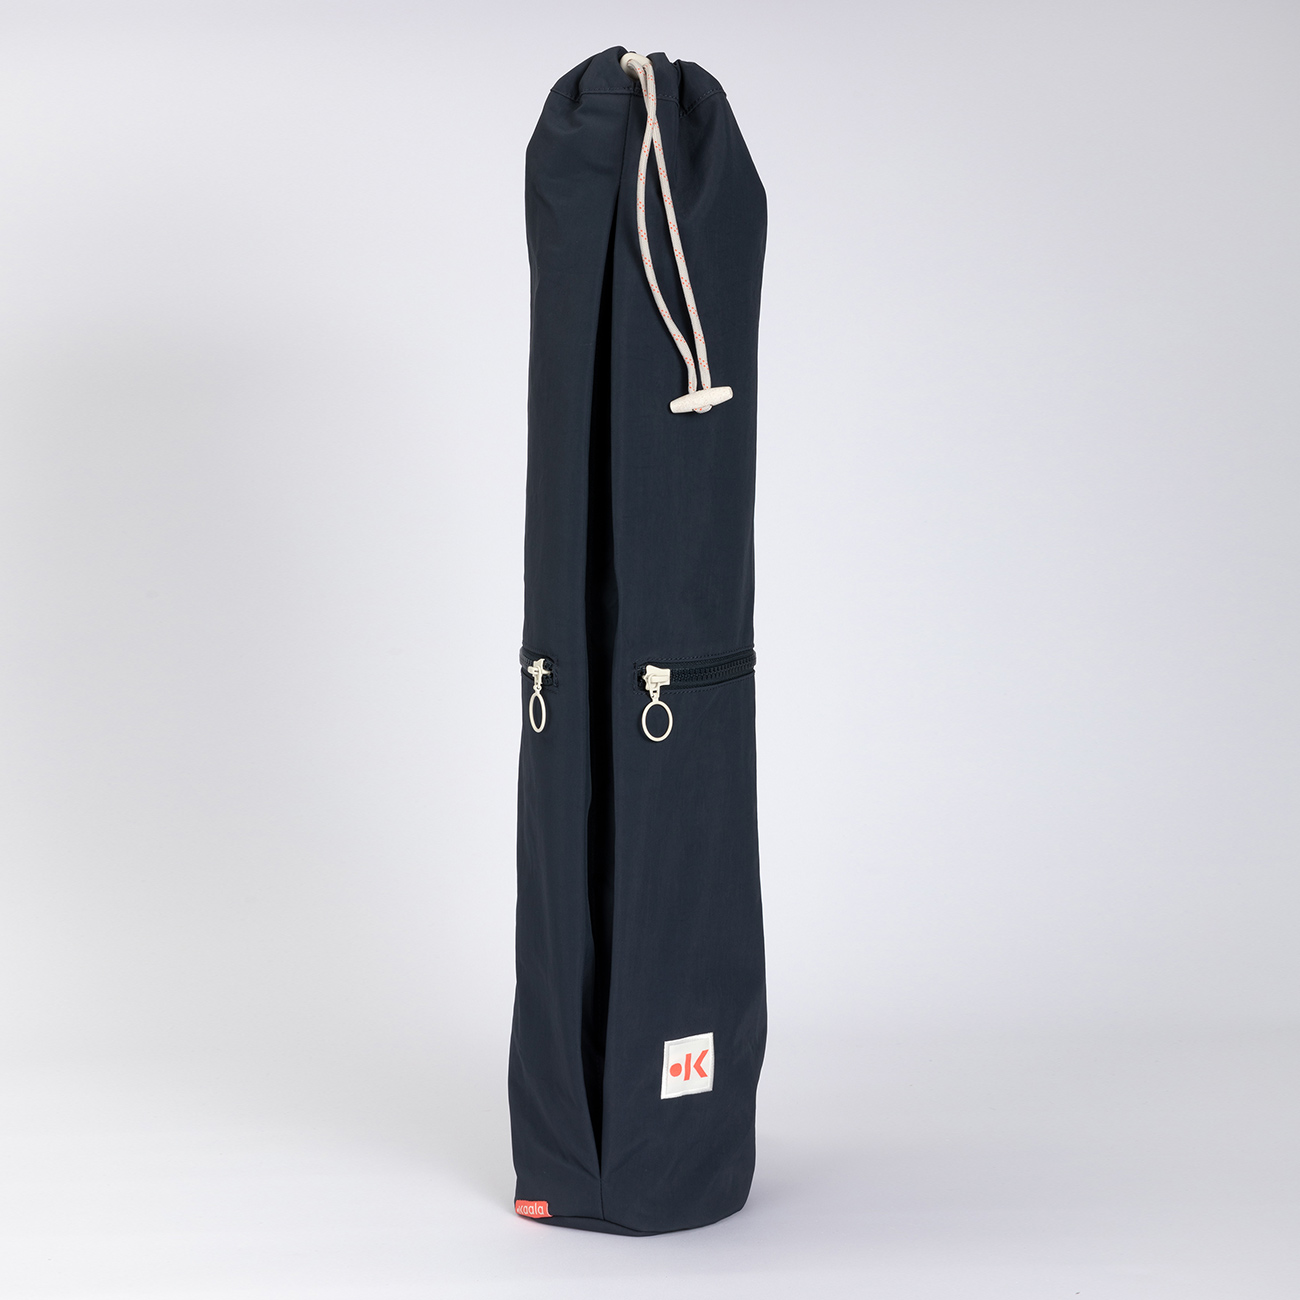 Bags and straps for your yoga mat